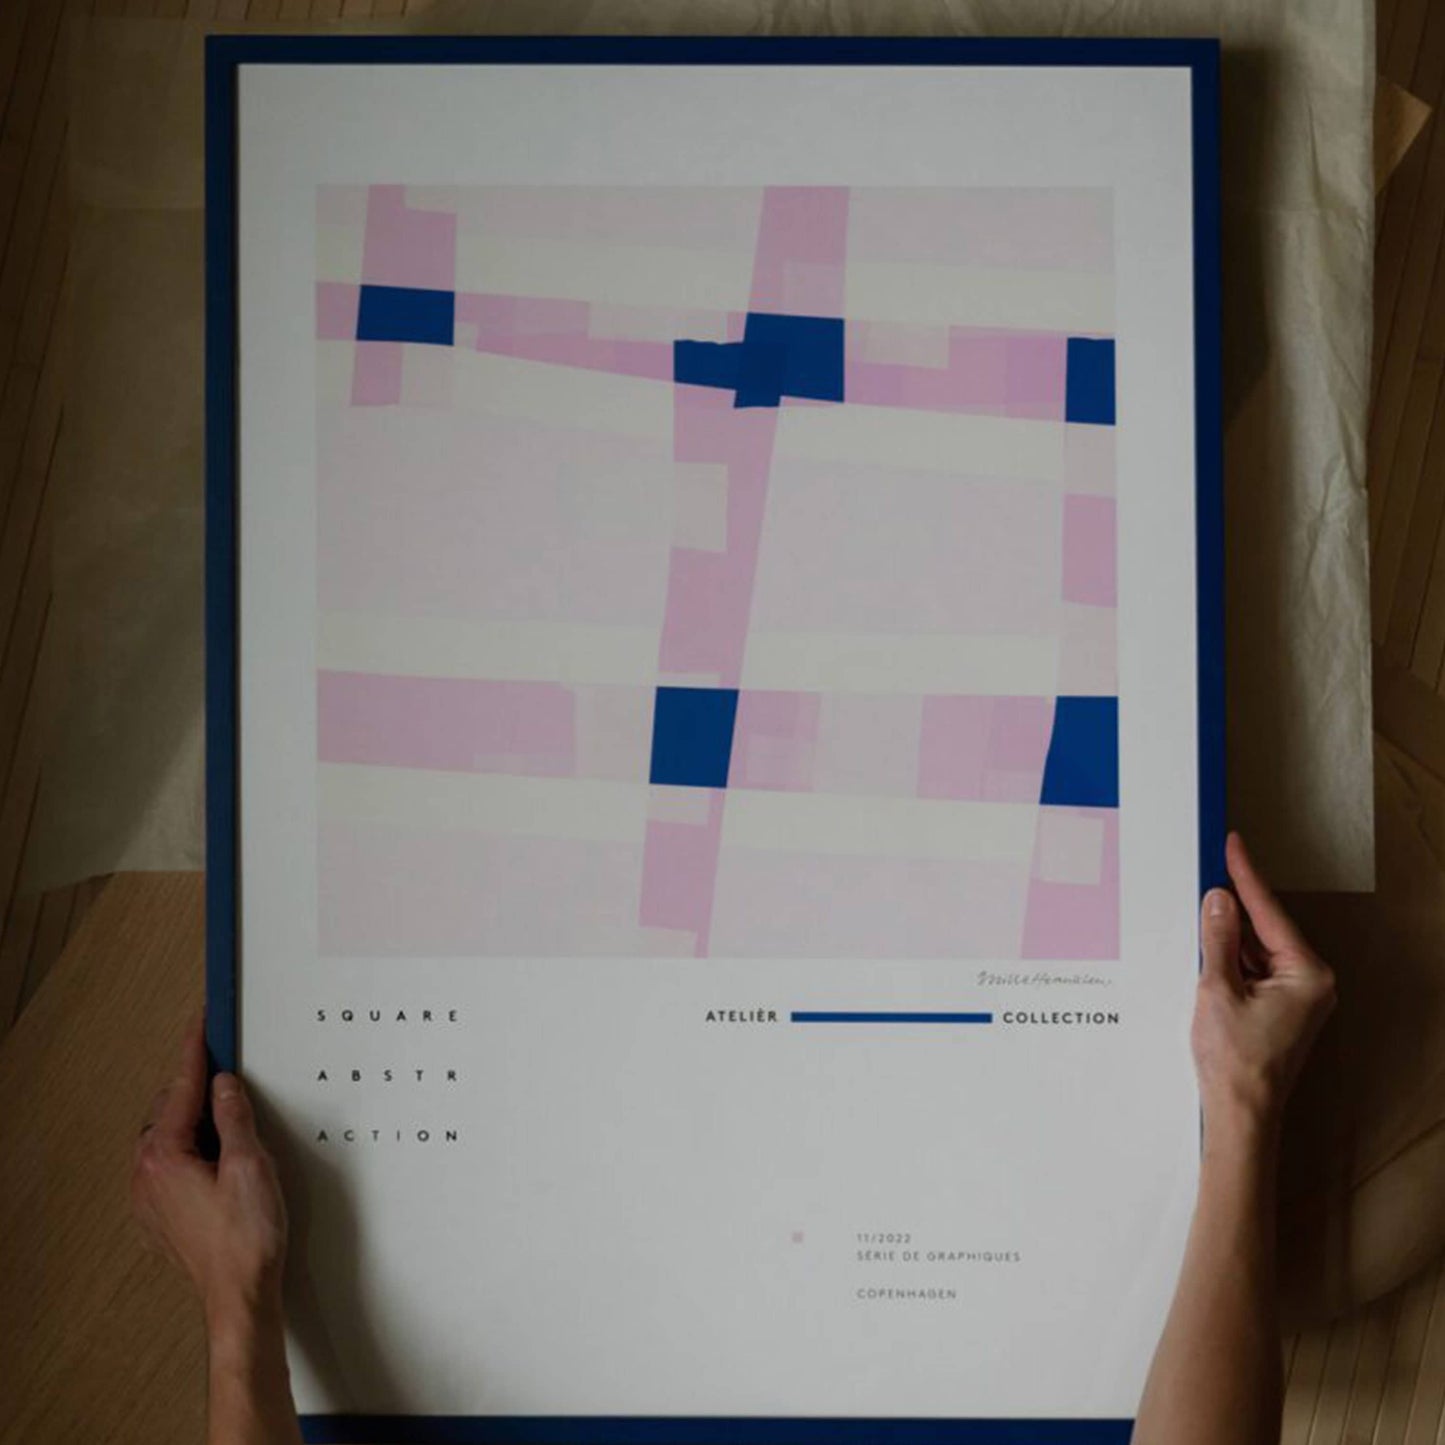 Square Abstraction Print 70Cm X 100Cm